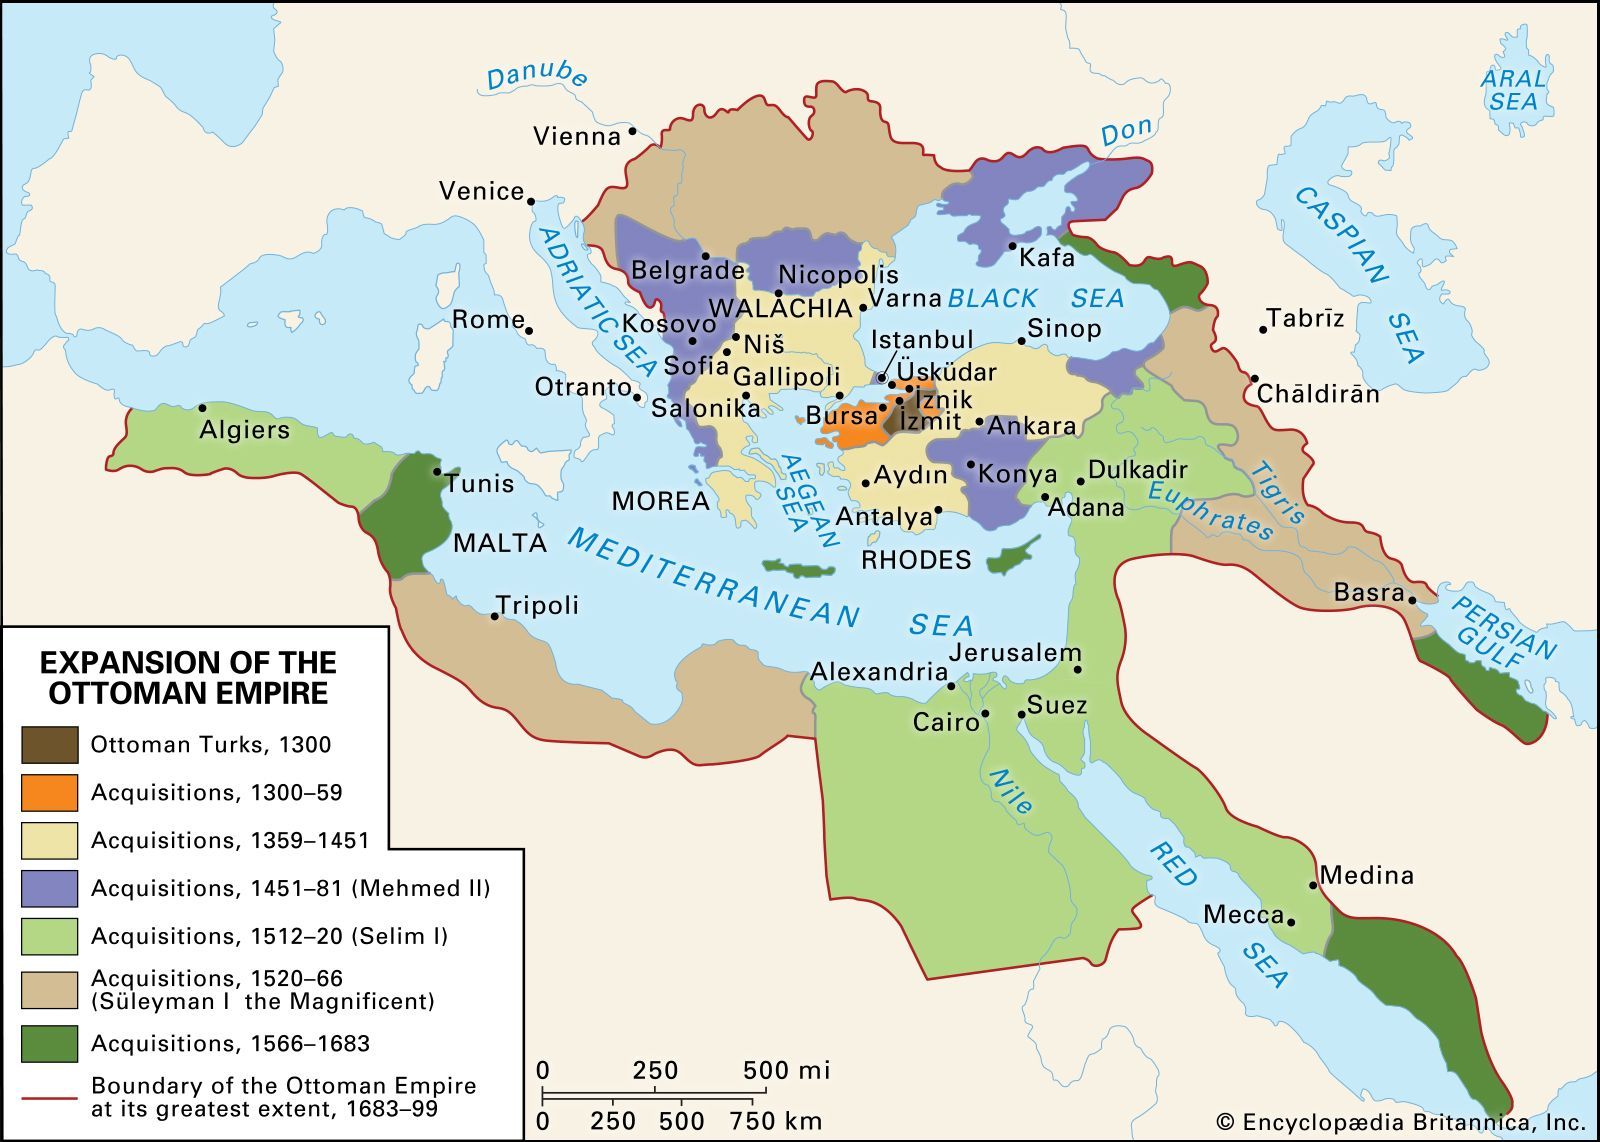 The Rise and Legacy of the 19th Century Ottoman Empire